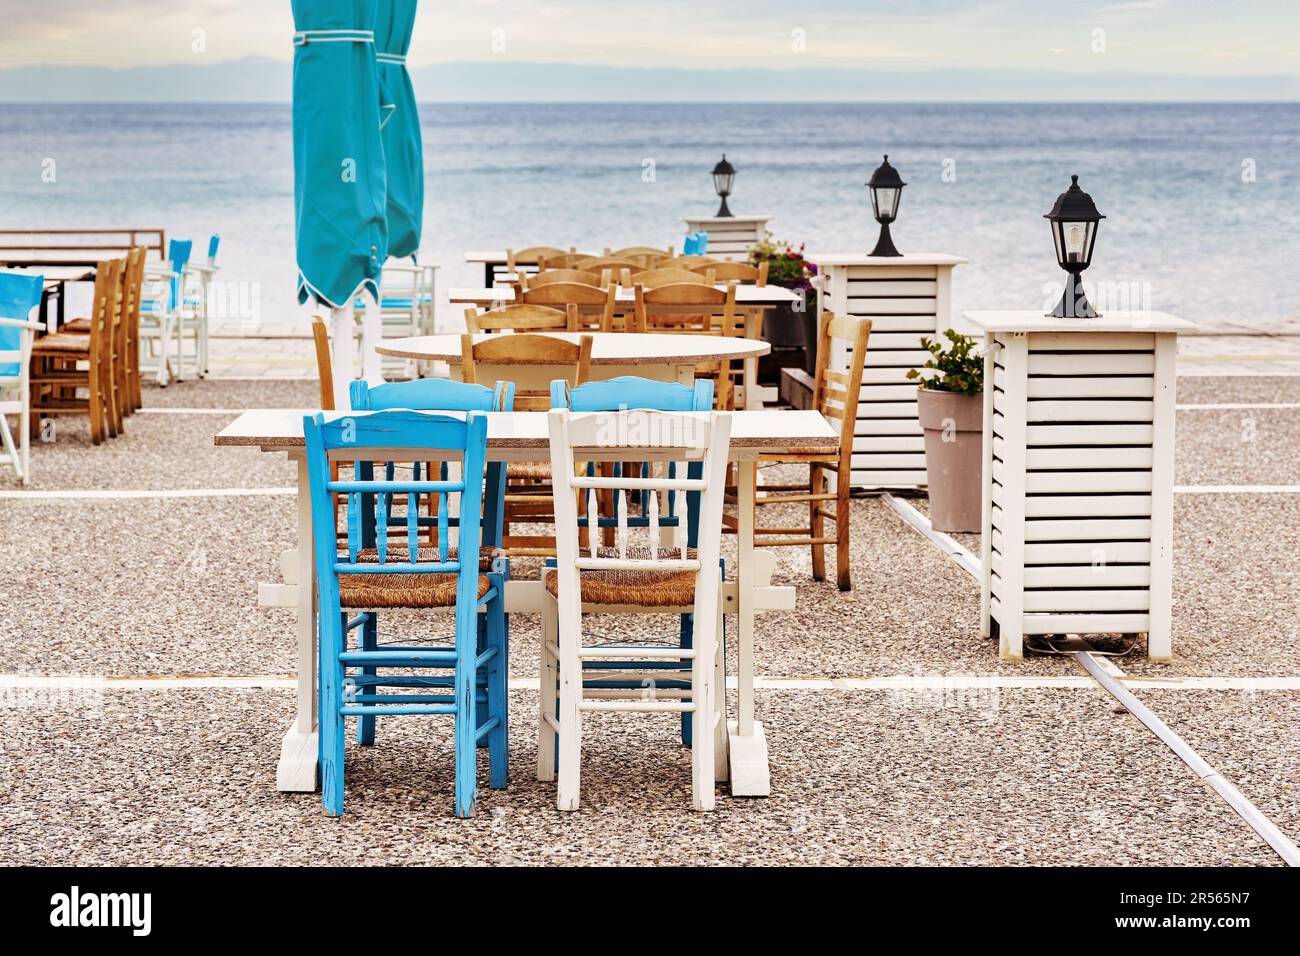 Wooden chairs and tables in blue and white in a taverna on the terrace next to the sea, tourist destination in Chalkidiki, Greece, selected focus Stock Photo